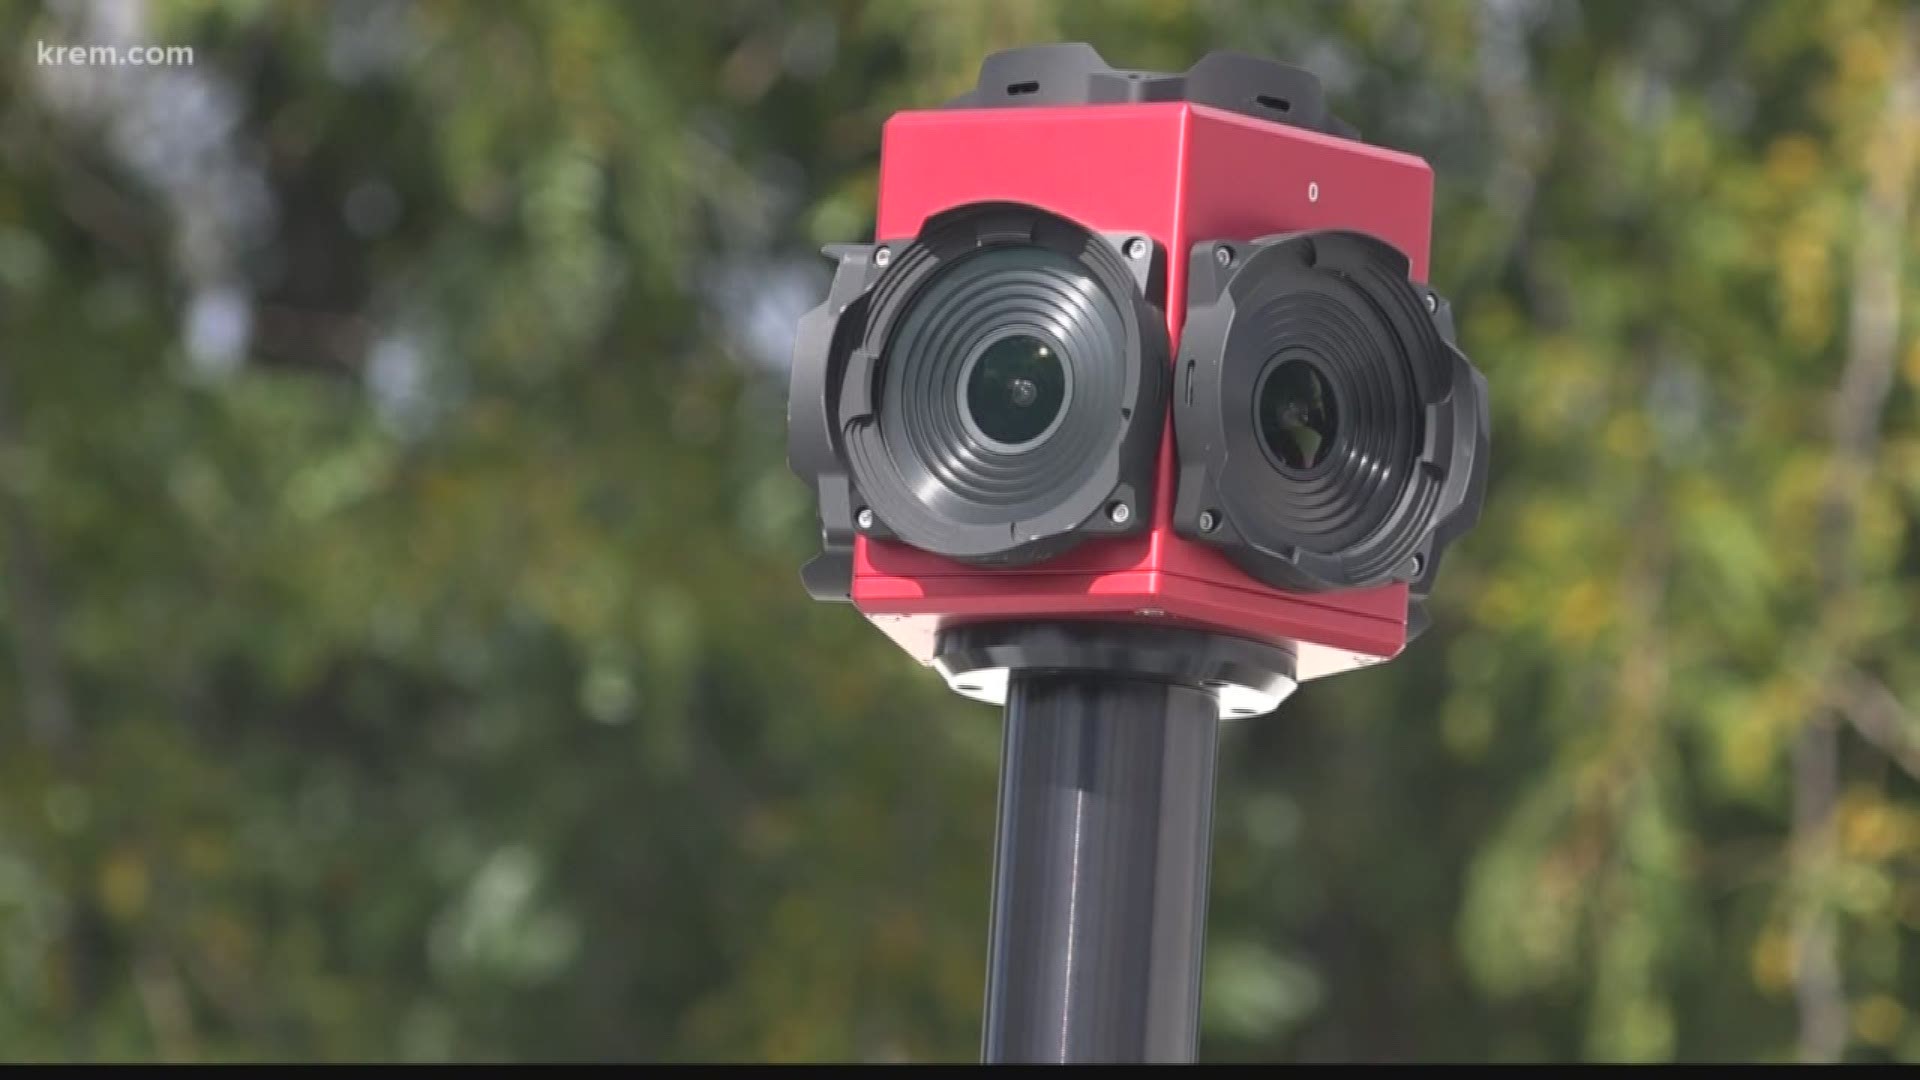 The city of Spokane Valley said the "Street Scan" car is a vendor it hired to take 3D scans of its roads.